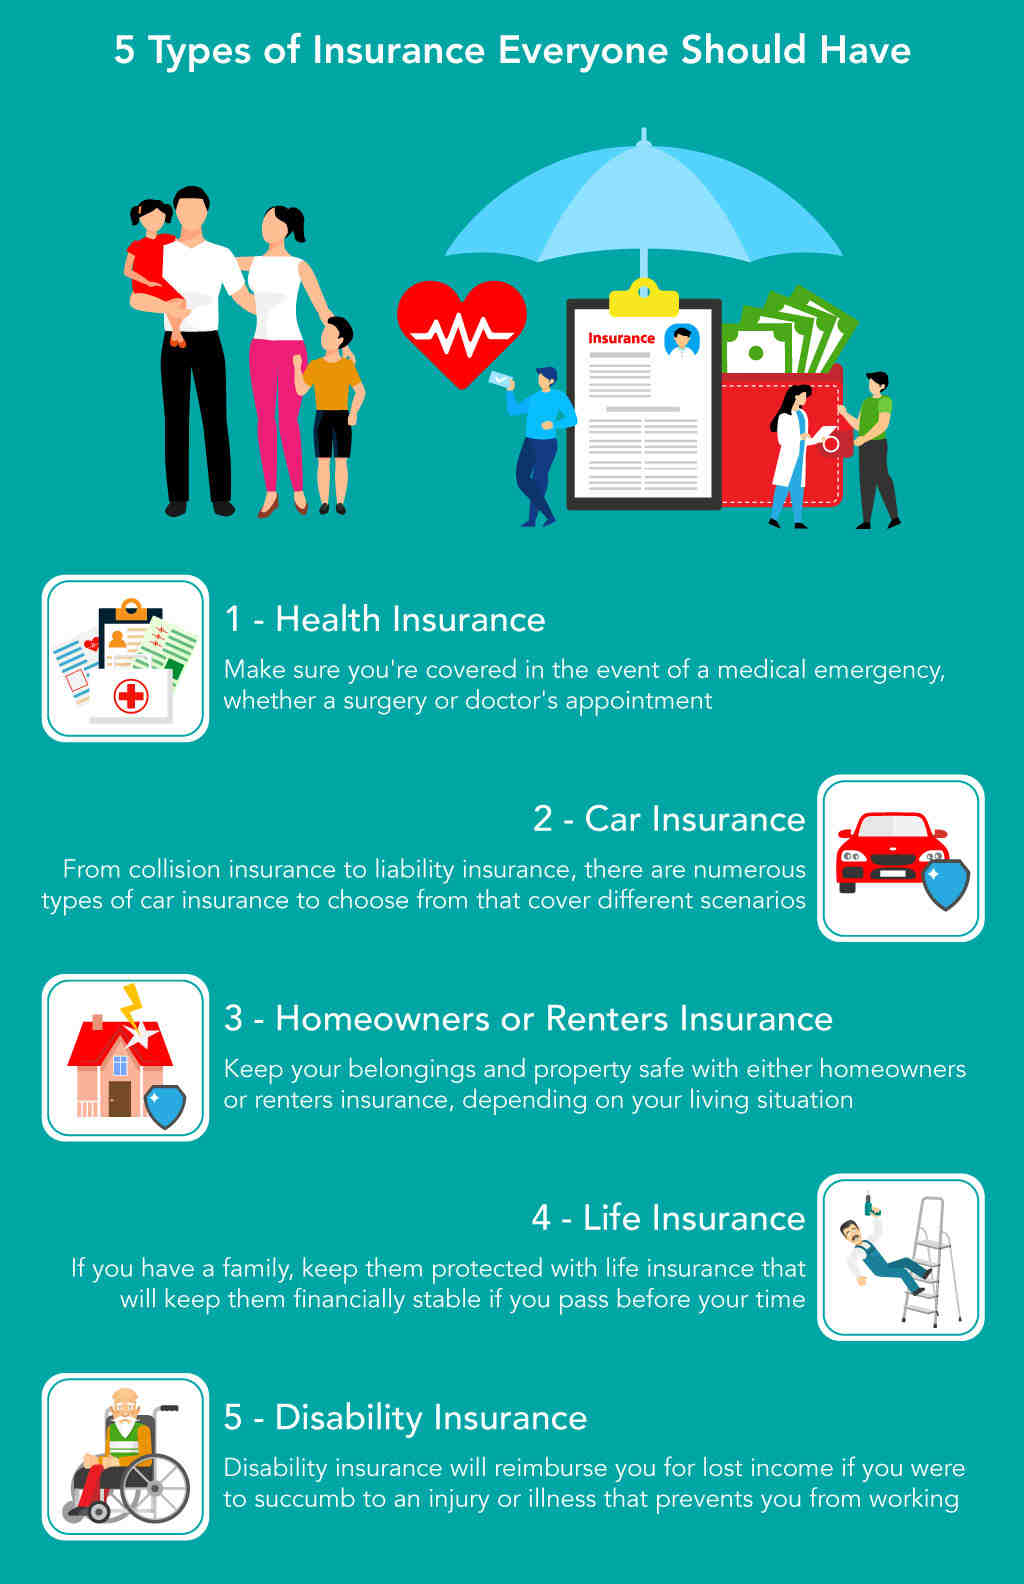 What are the 3 types of car insurance?